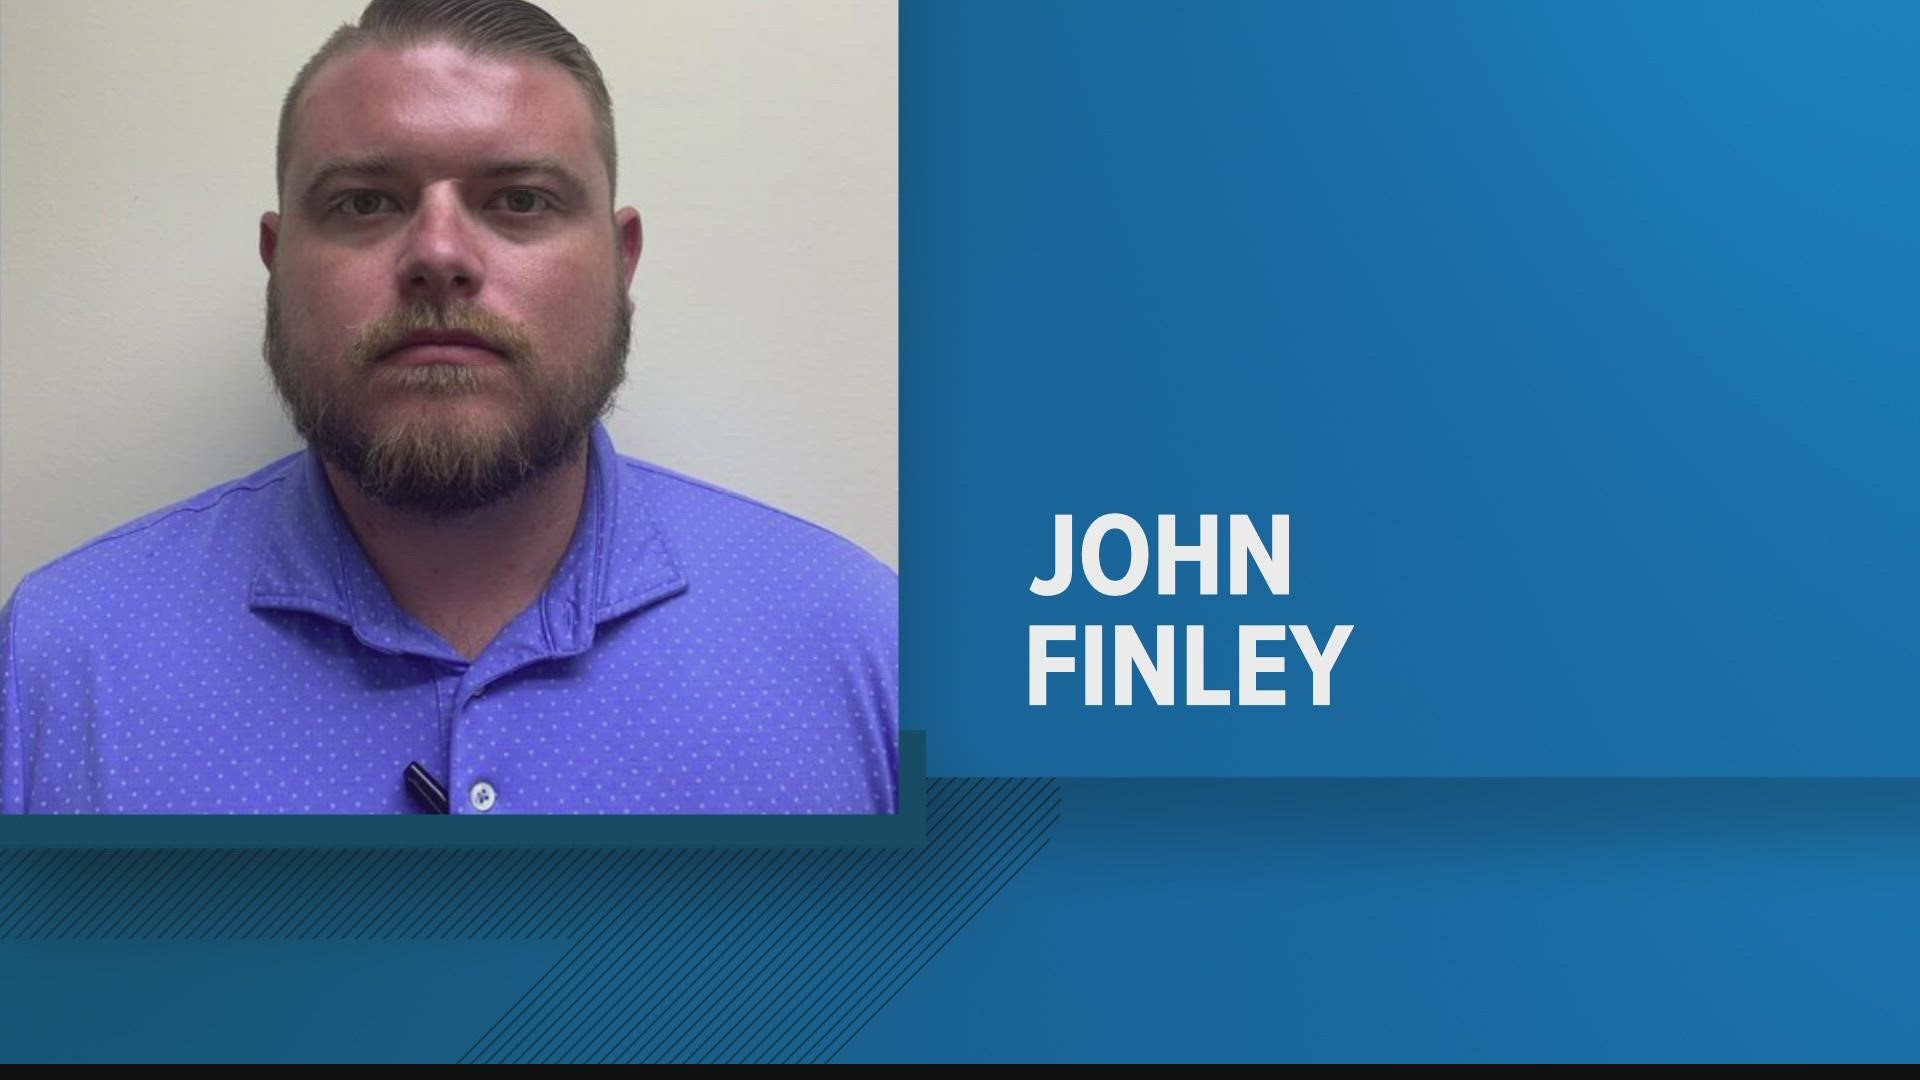 Charges for John Finley Jr., 33, included sexual battery. Deputies said a woman accused the officer of "date rape." His bond was reduced to just over $100,000.